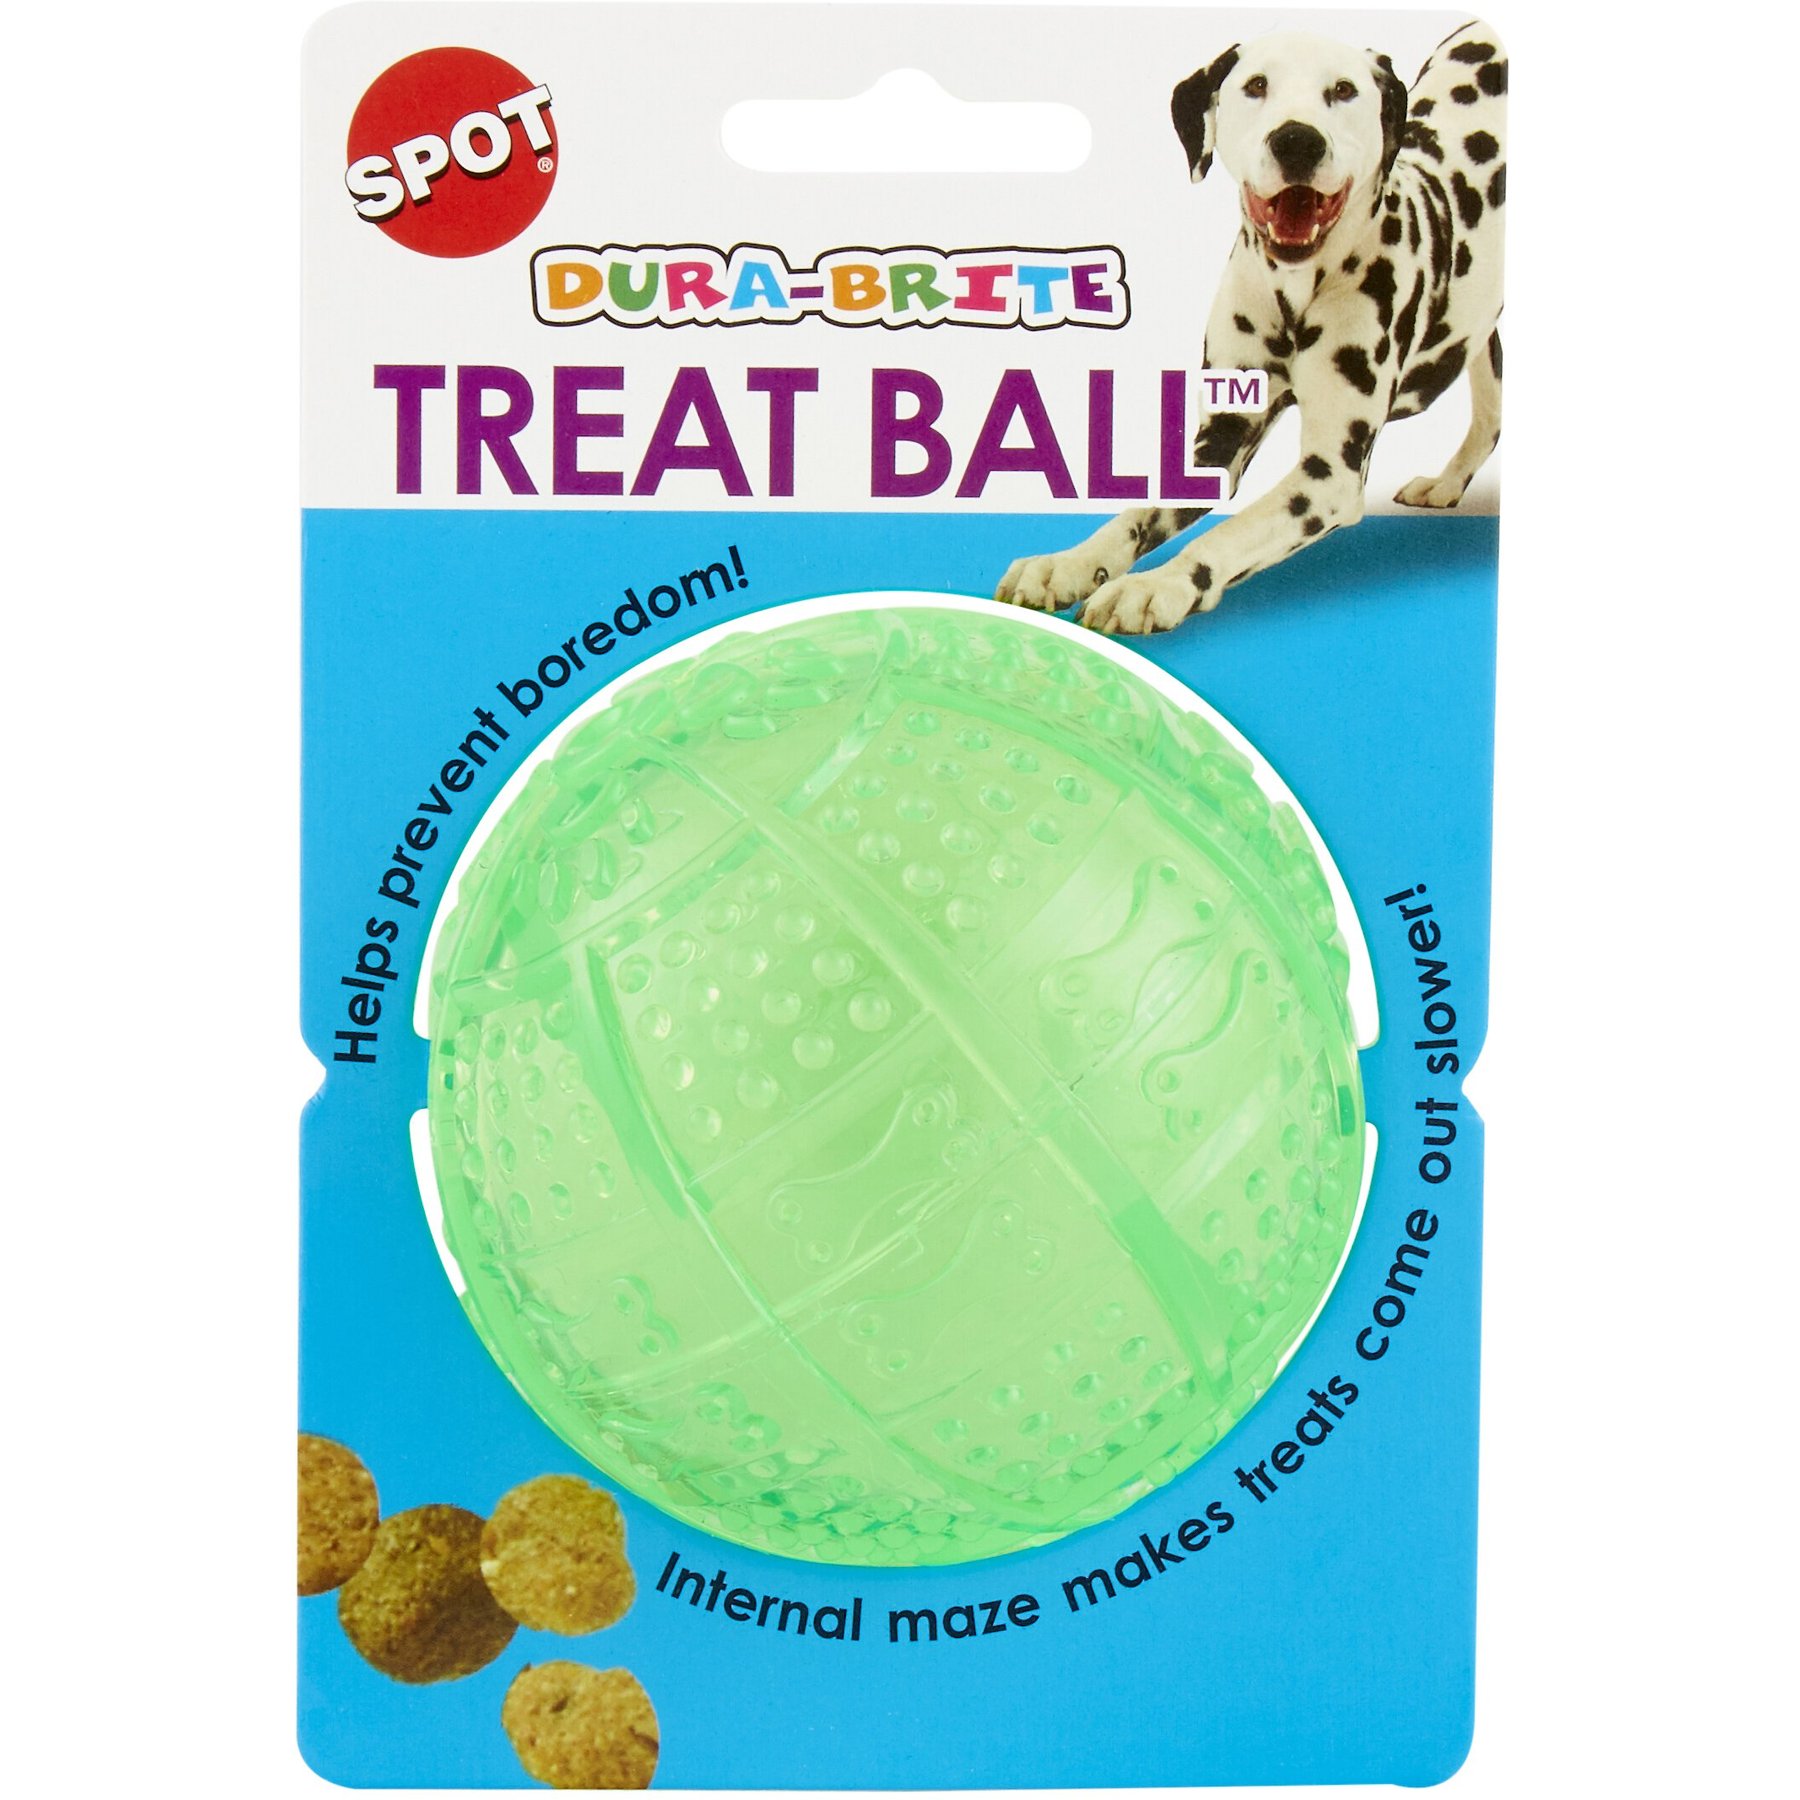 OurPets IQ Treat Ball Interactive Food Dispensing Dog Toy, 4 Inches 2